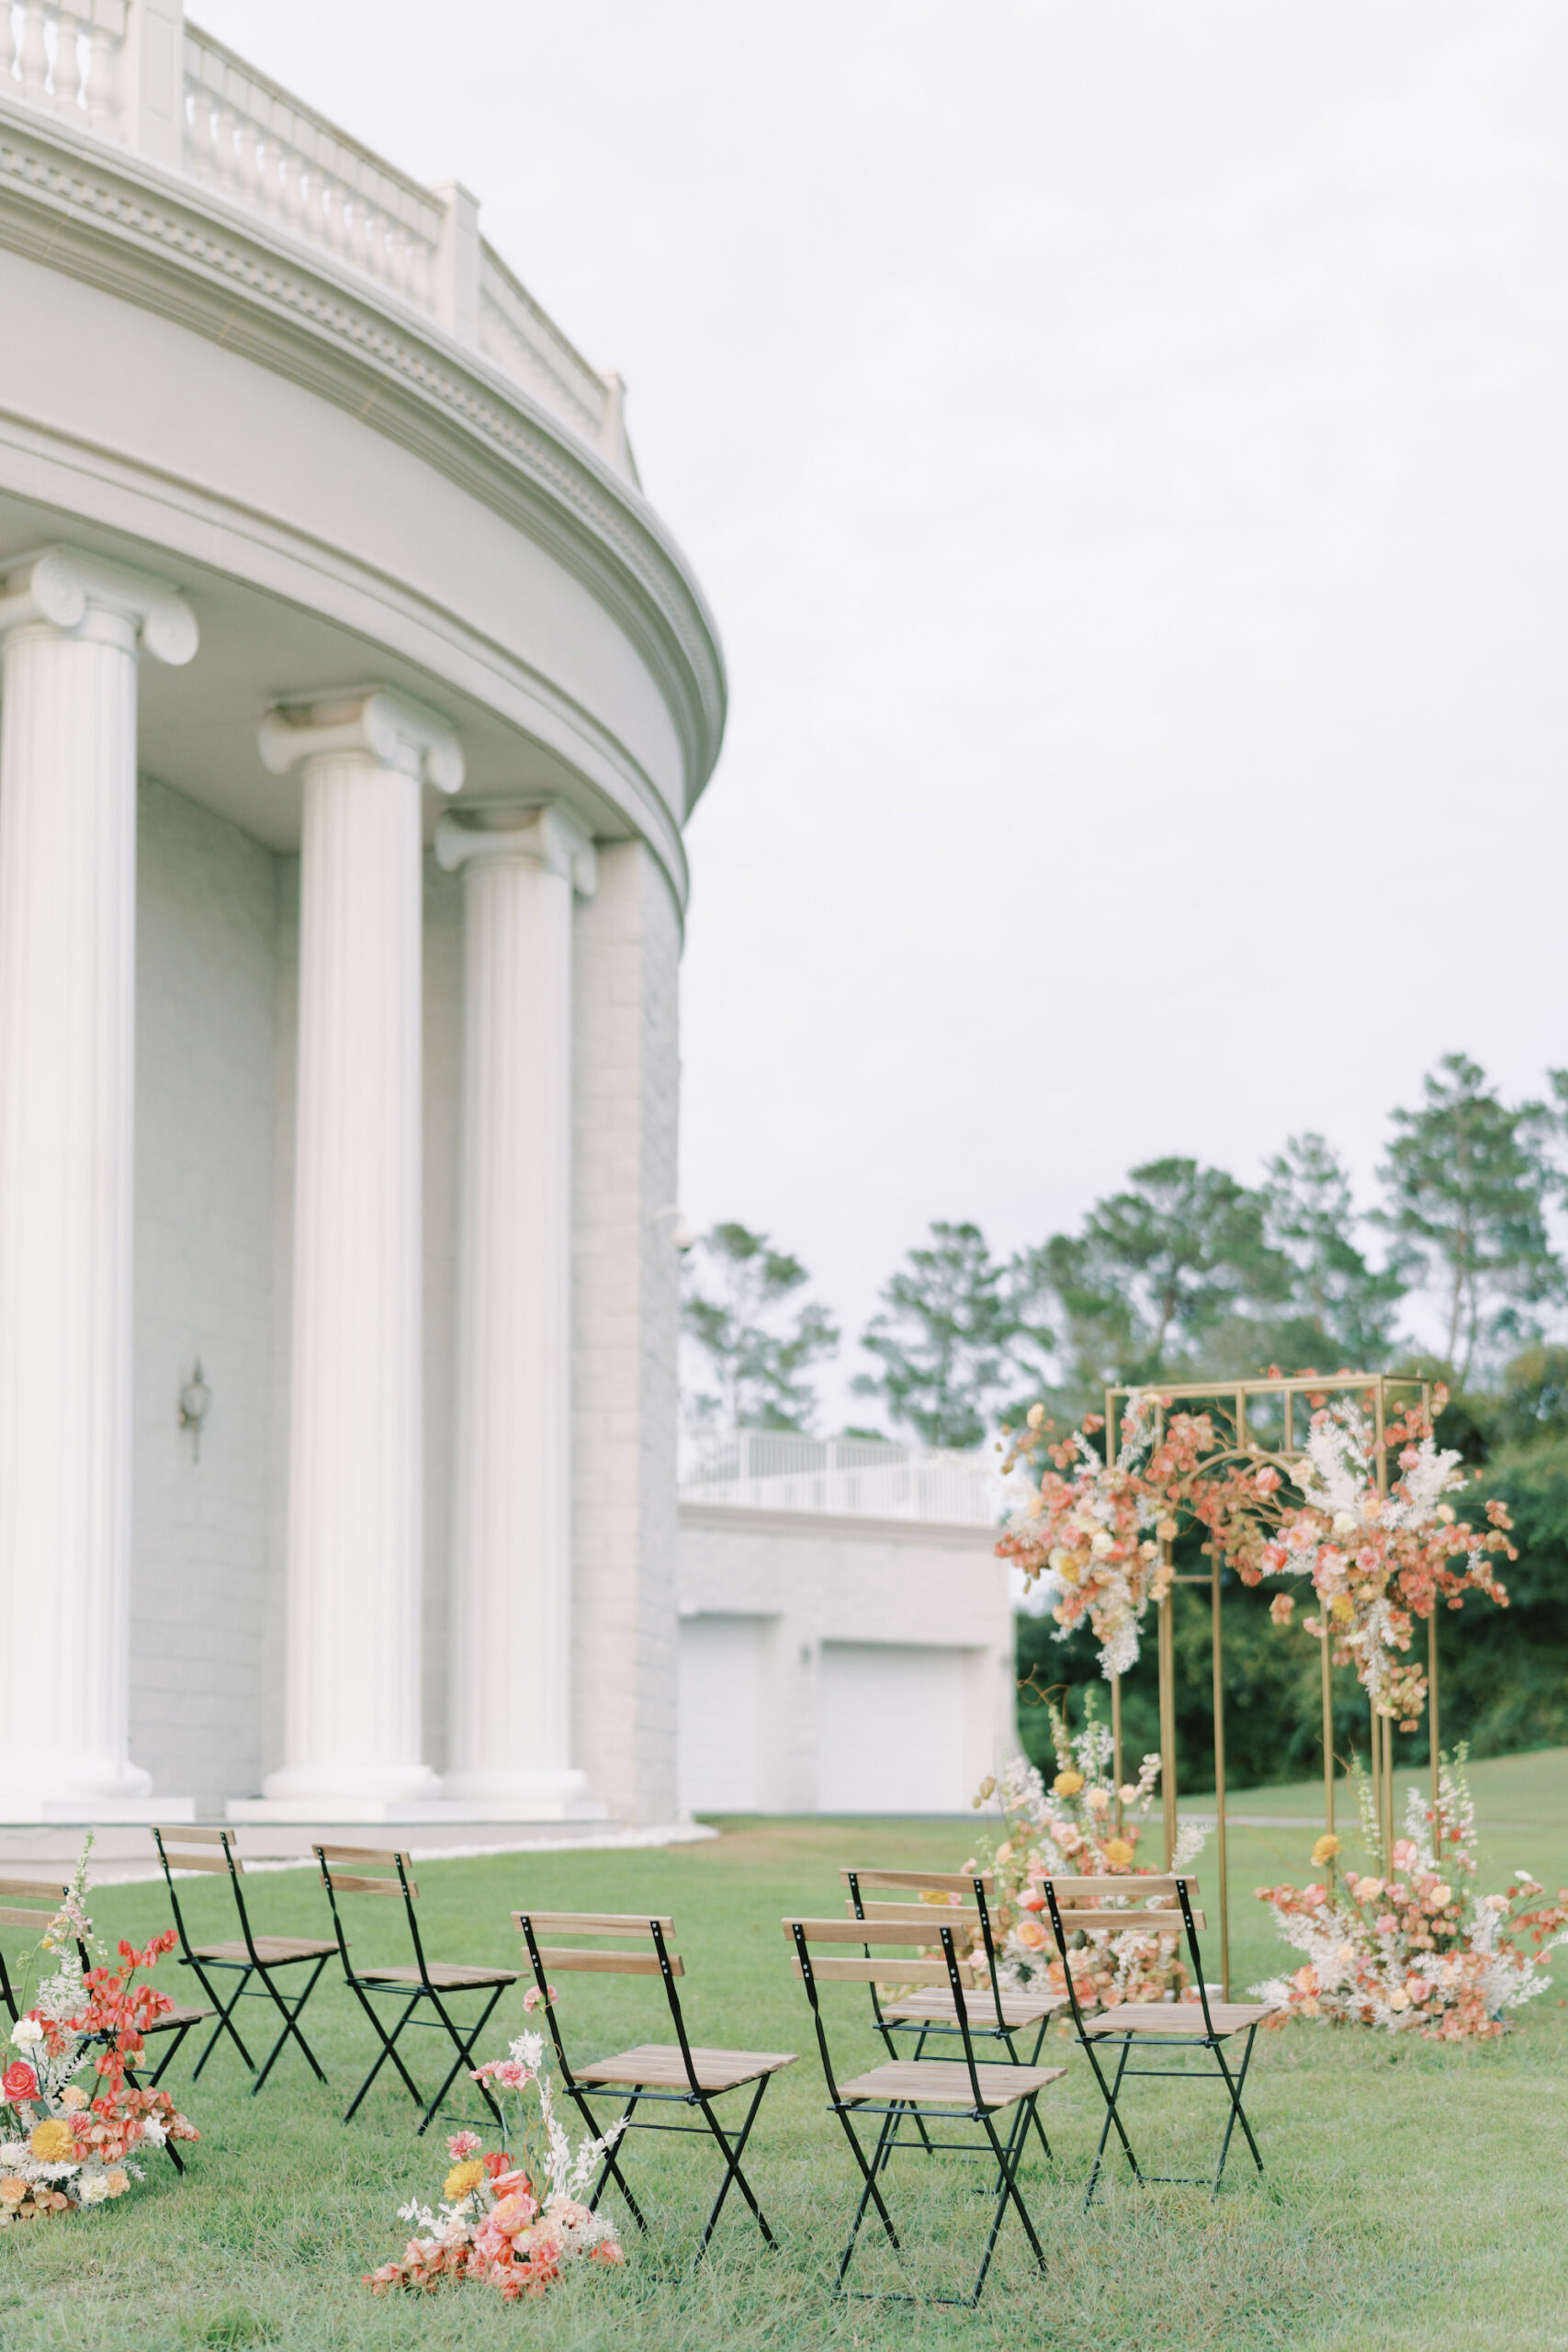 Outdoor Spring Garden Wedding Inspiration with Orange, White, Yellow, and Peach Ceremony Arch Flower Arrangements | Modern Wood and Black Metal Chair Seating Ideas | Tampa Bay Venue Whitehurst Gallery